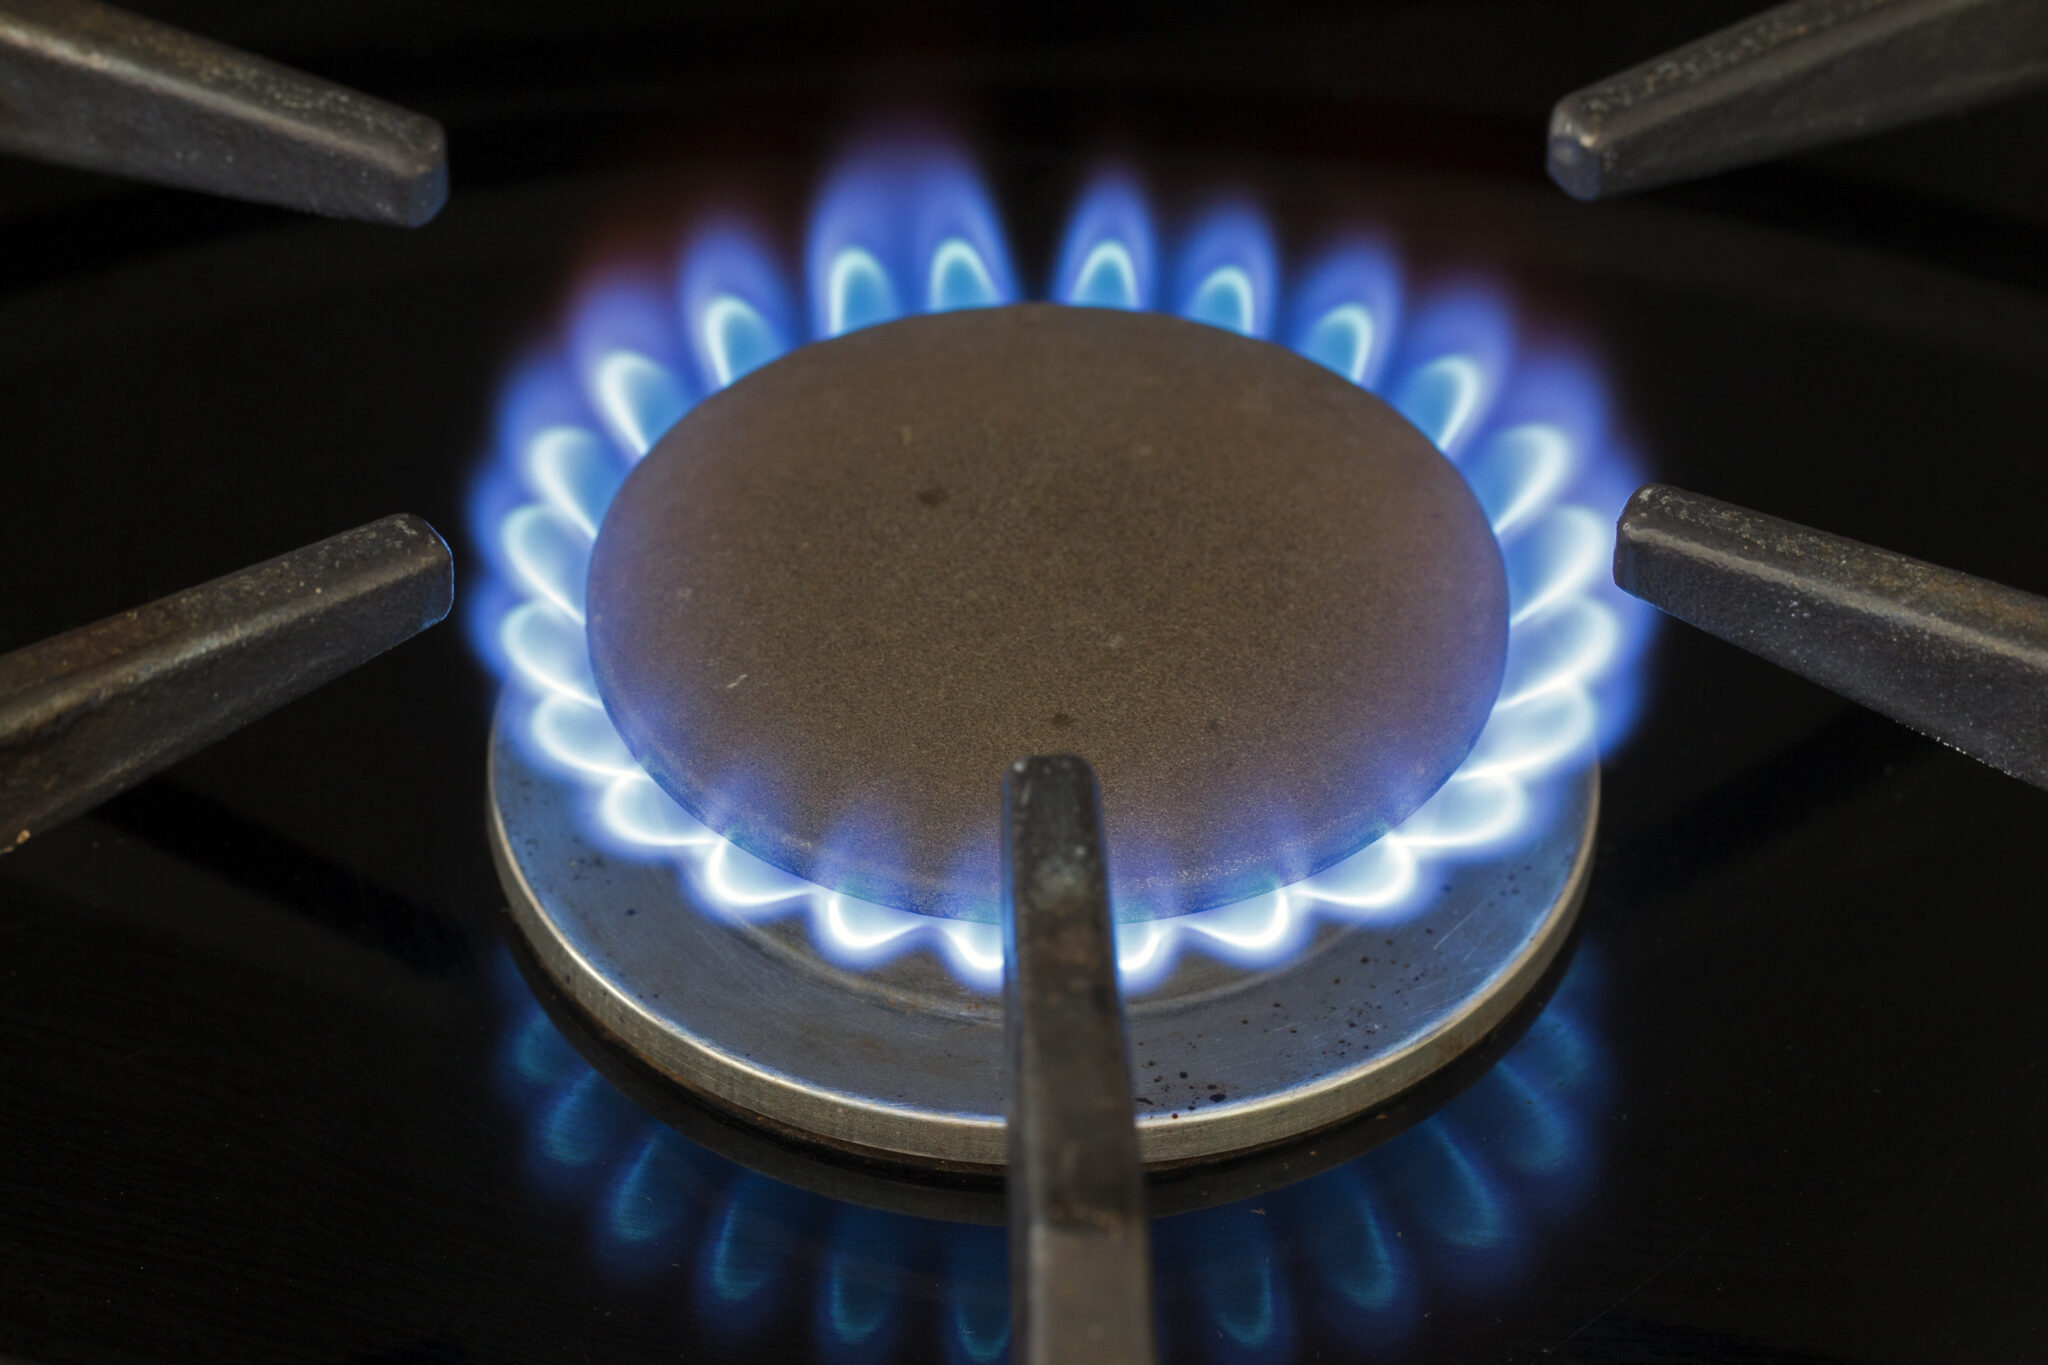 Blue natural gas flame on a domestic cooker gas hob. (Photo by: Arterra/Universal Images Group via Getty Images)